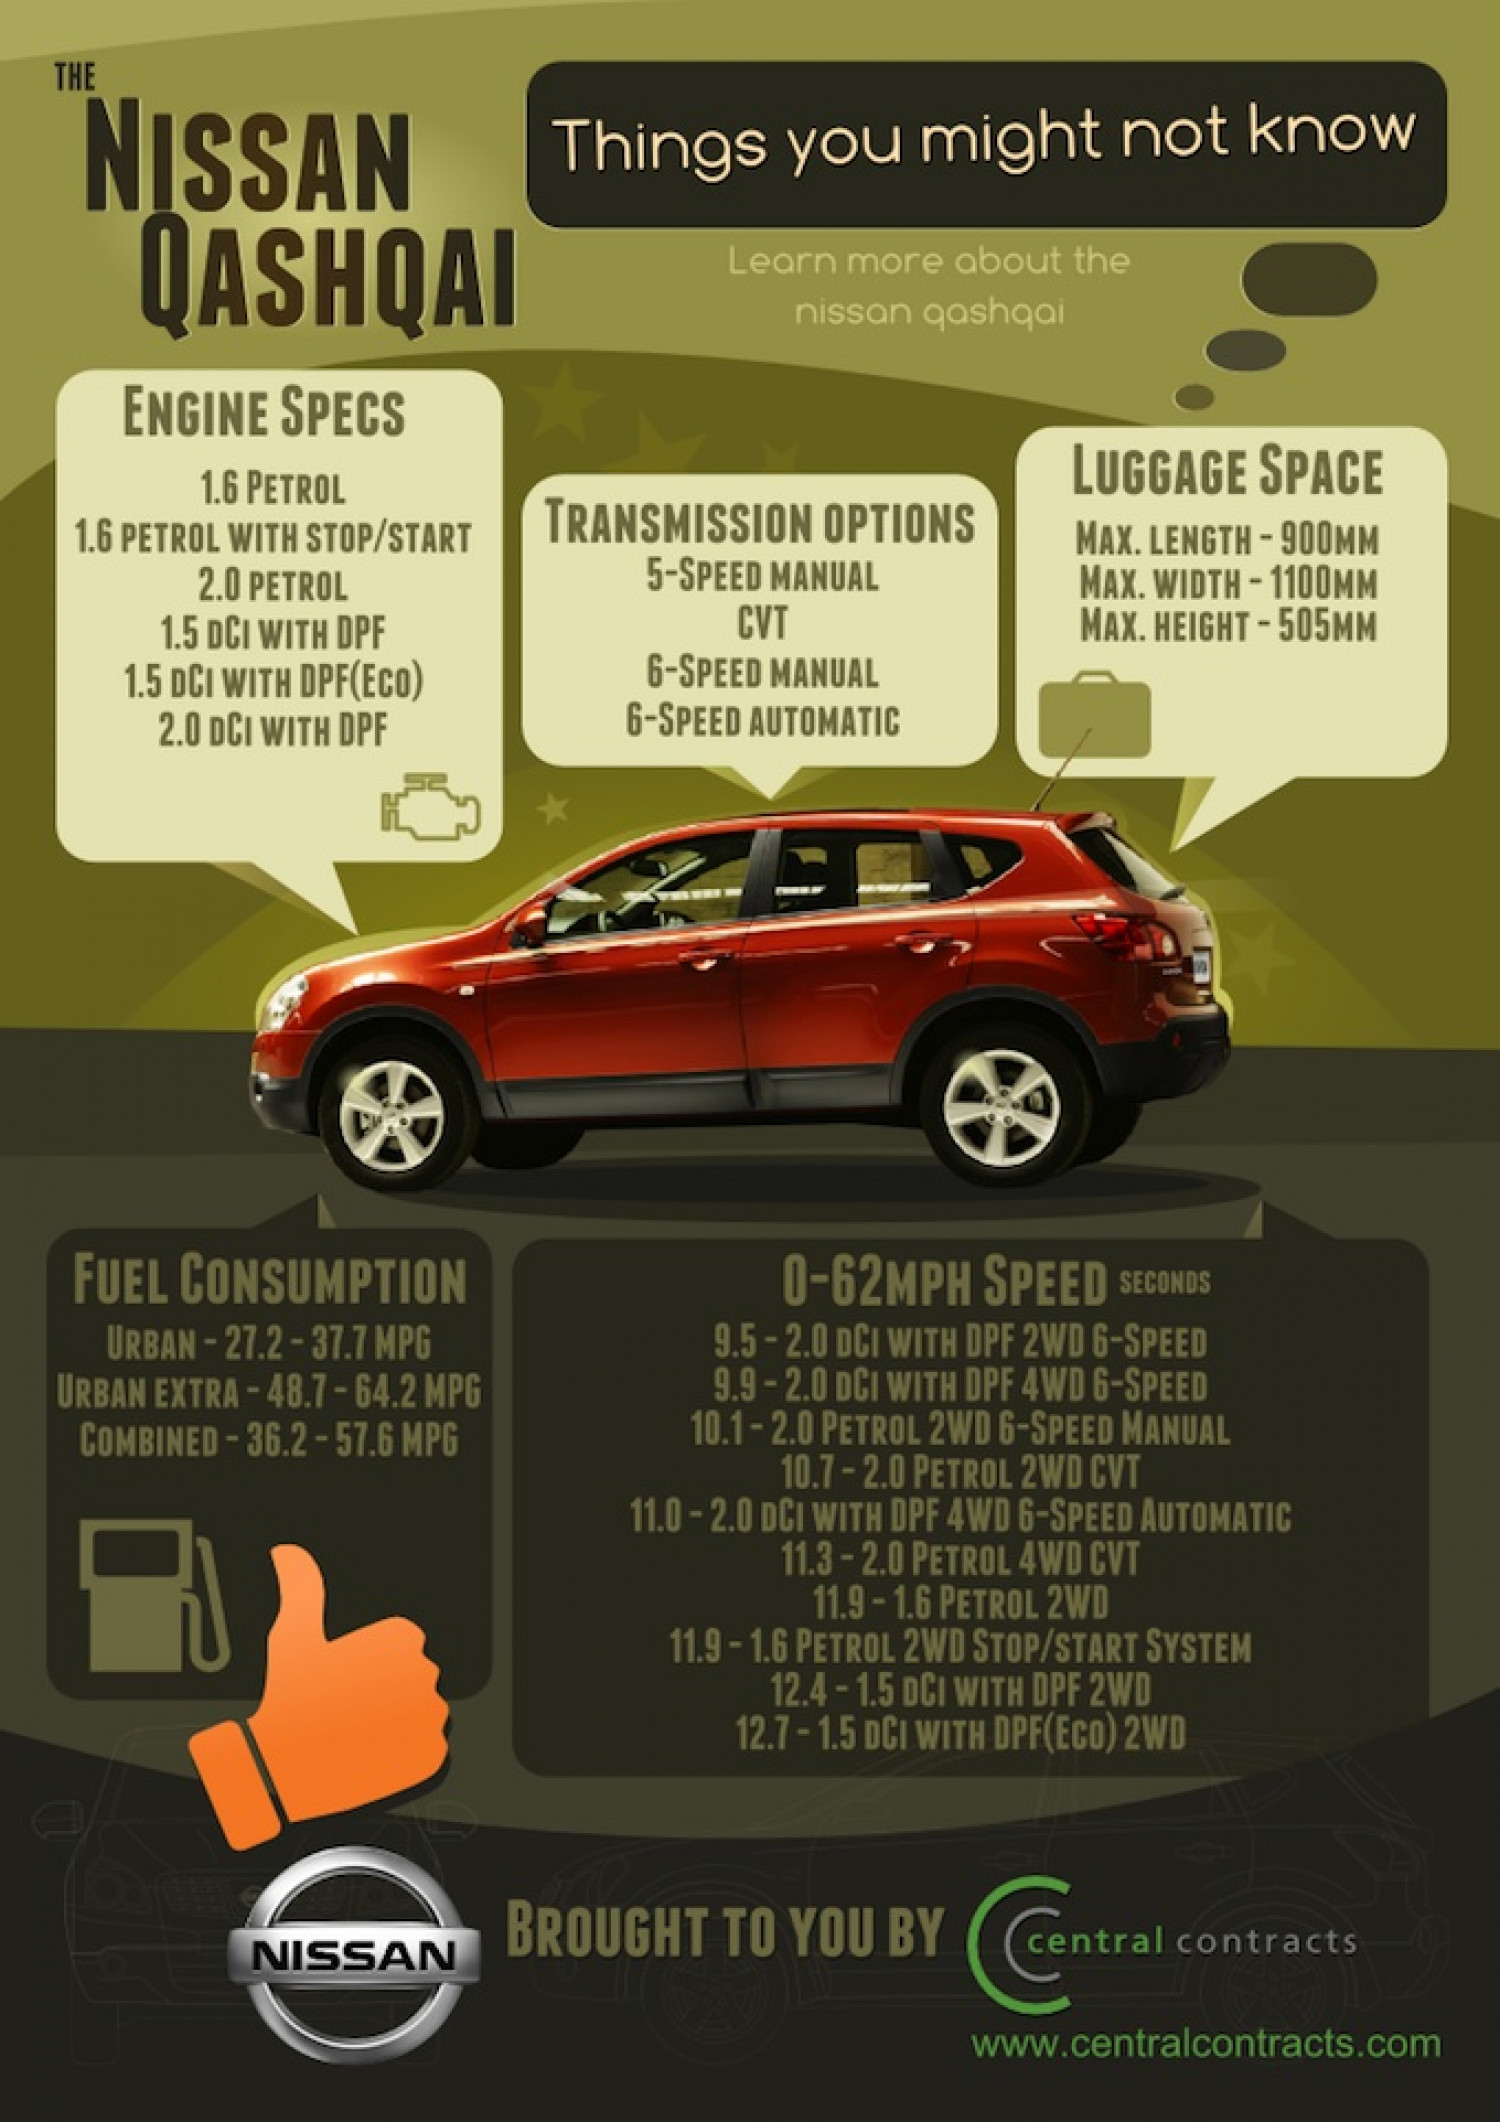 Nissan Qashqai Things you might not know Infographic